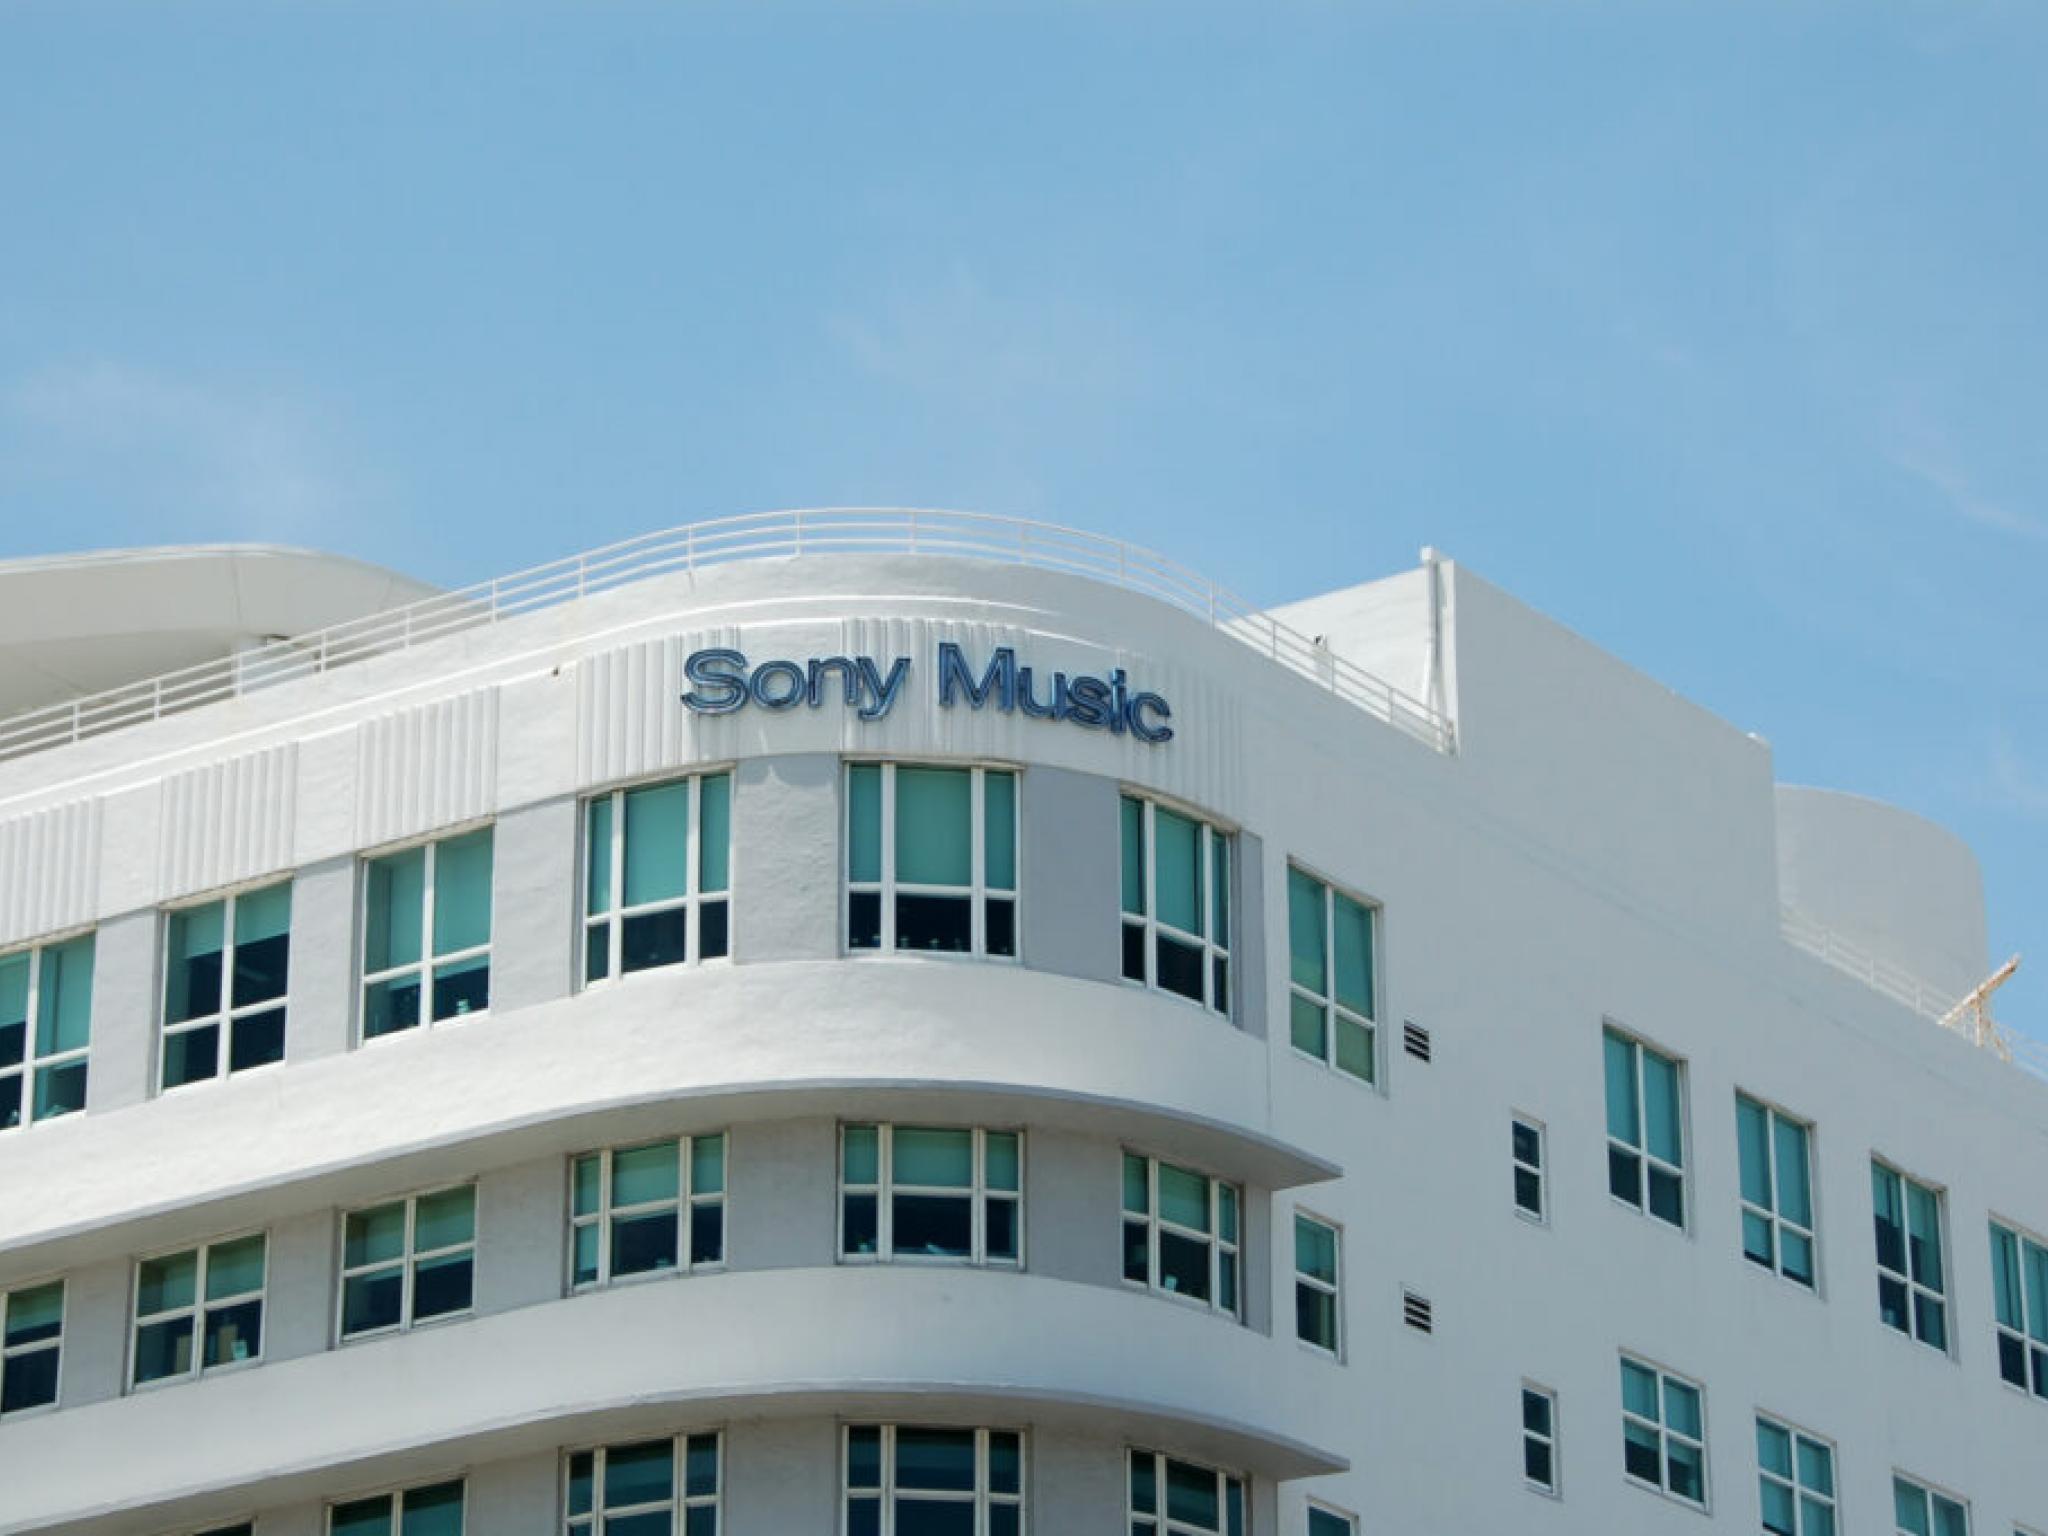  sony-music-ceo-warns-of-potential-tiktok-exodus-we-should-share-in-those-profits 